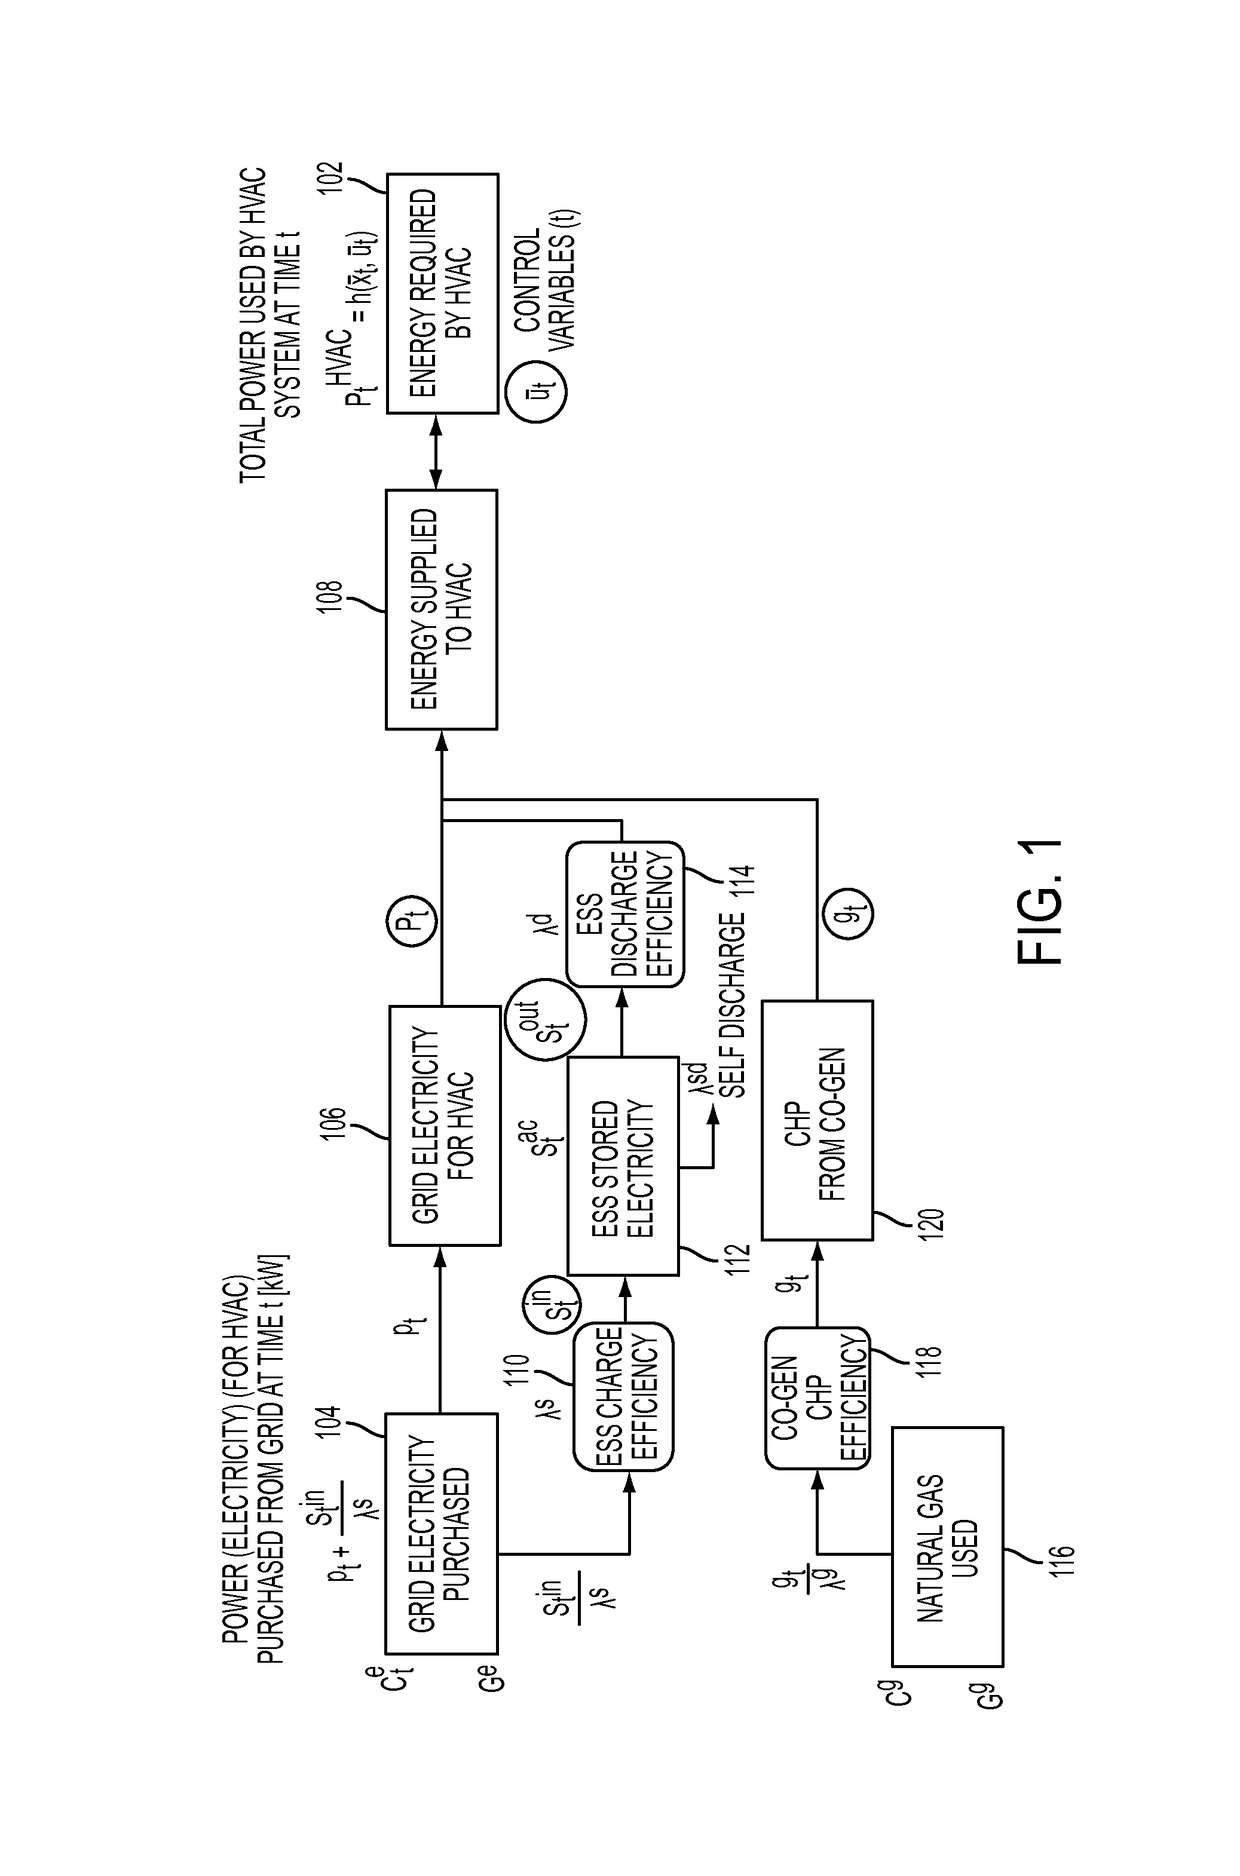 HVAC system control integrated with demand response, on-site energy storage system and on-site energy generation system